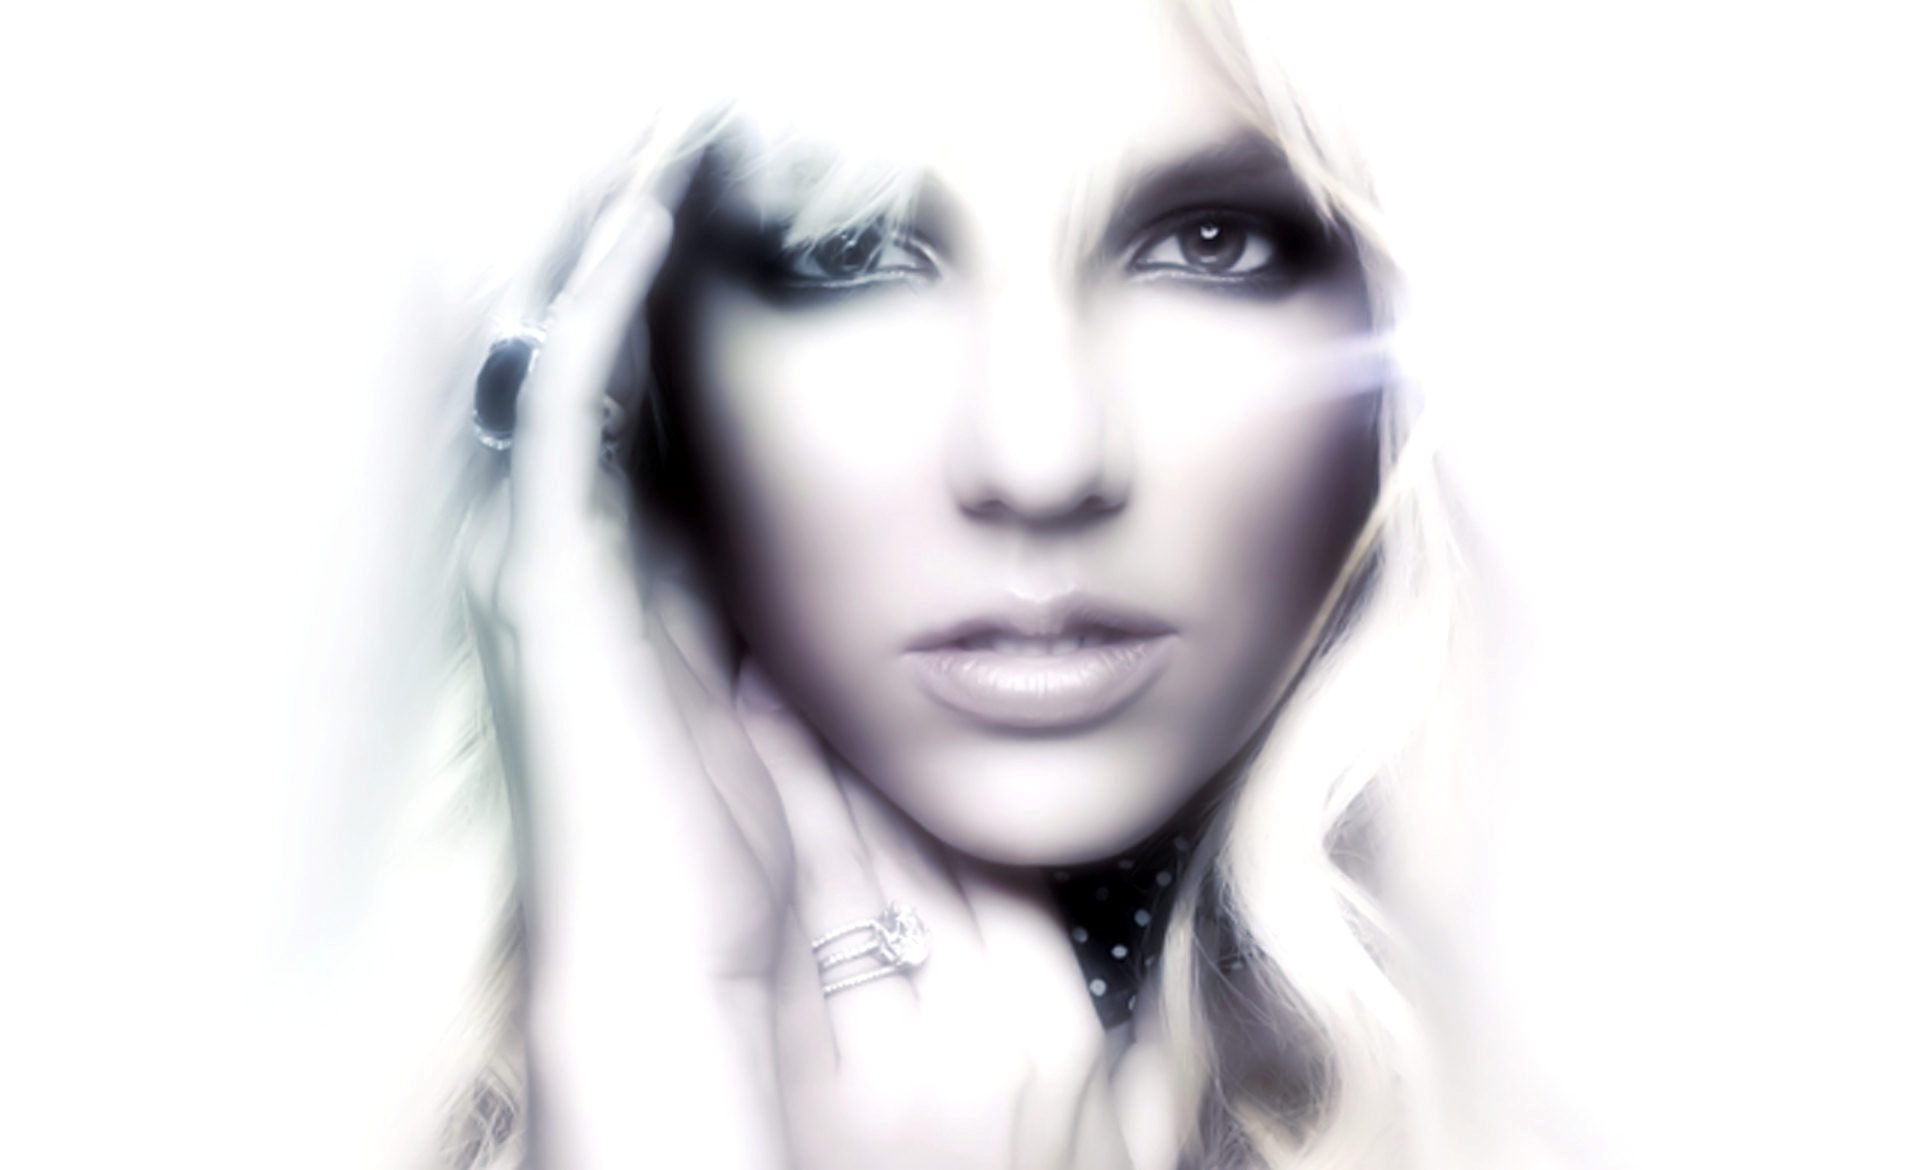 Britney Spears, Portret